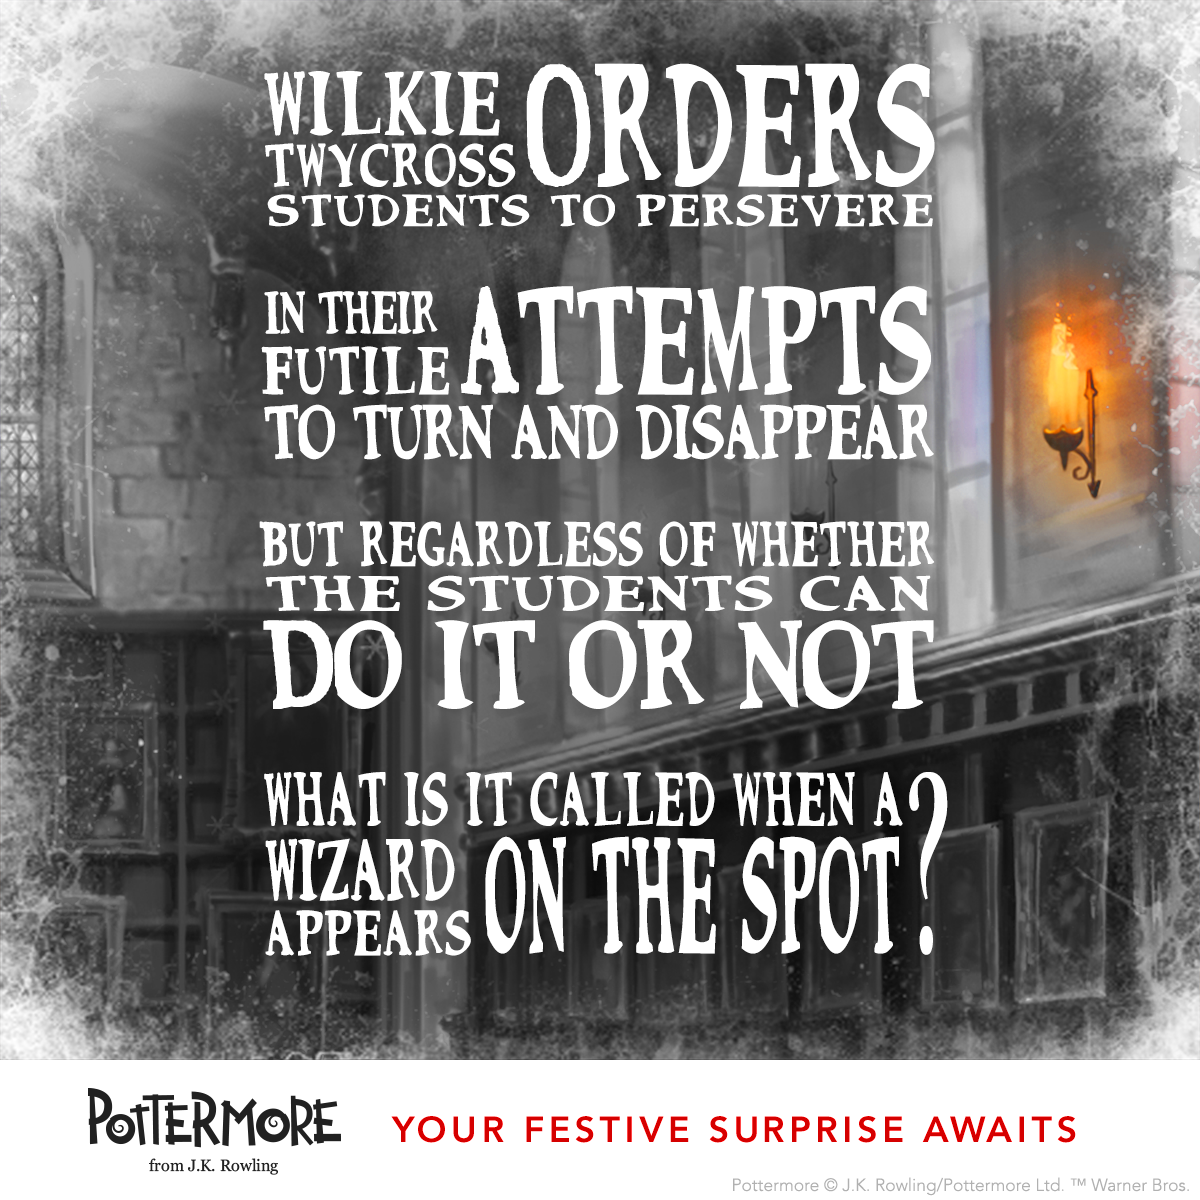 Day 7 of J.K. Rowling’s Twelve Days of Christmas Harry Potter Moments